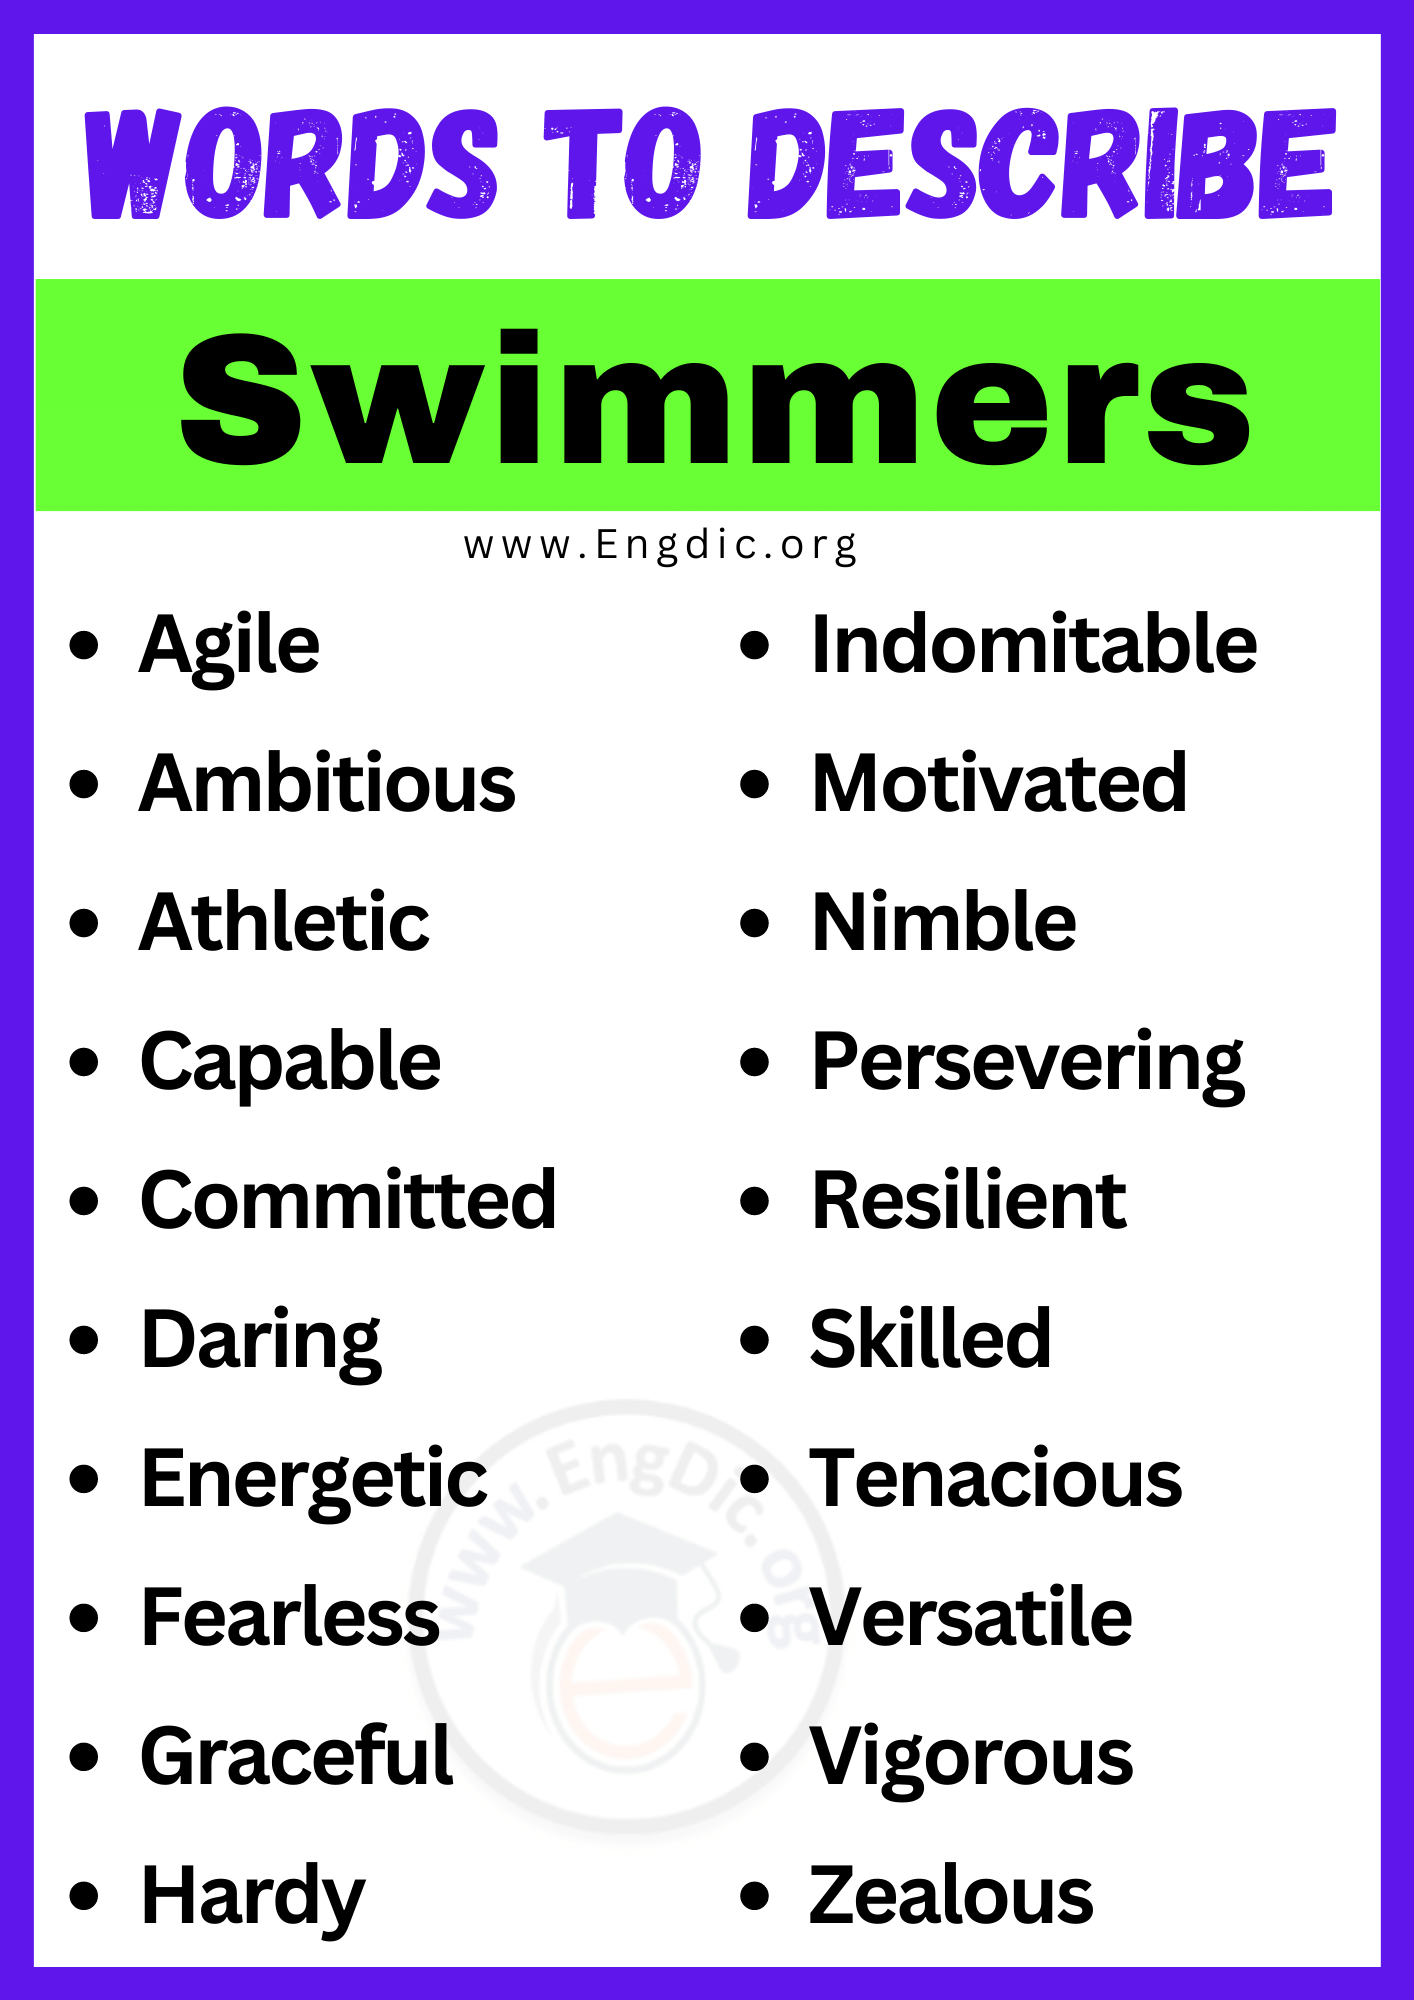 Words to Describe Swimmers